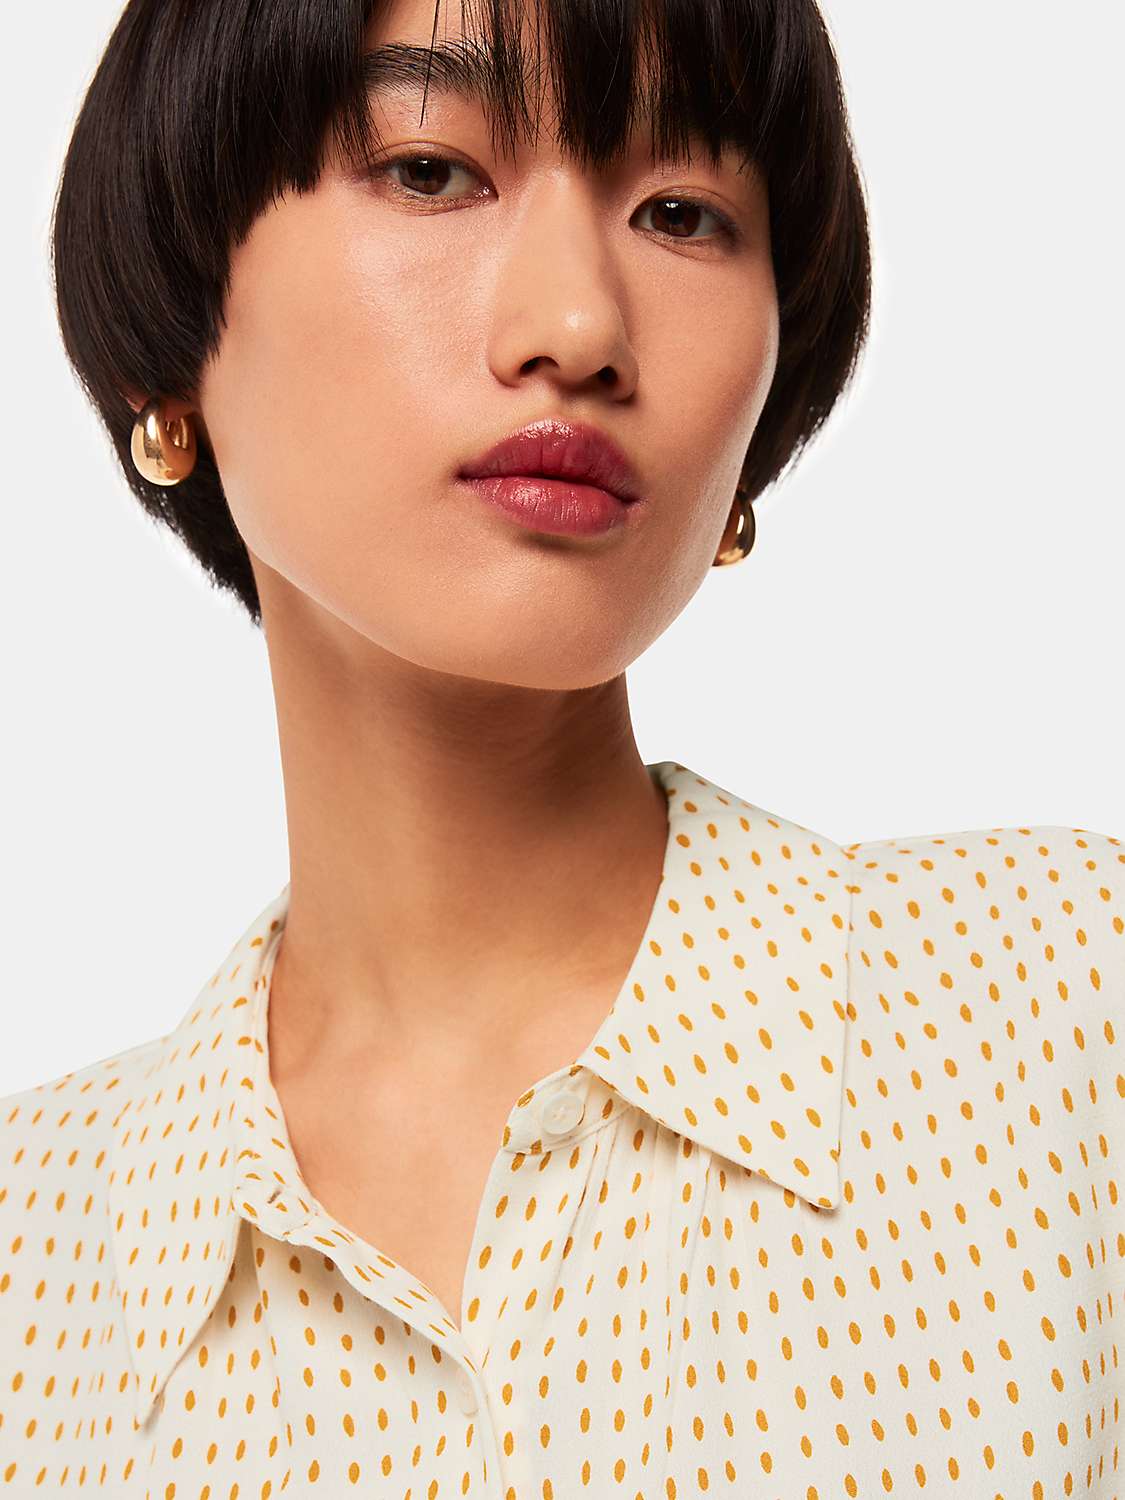 Buy Whistles Oval Spot Tie Sleeve Blouse, Ivory/Multi Online at johnlewis.com